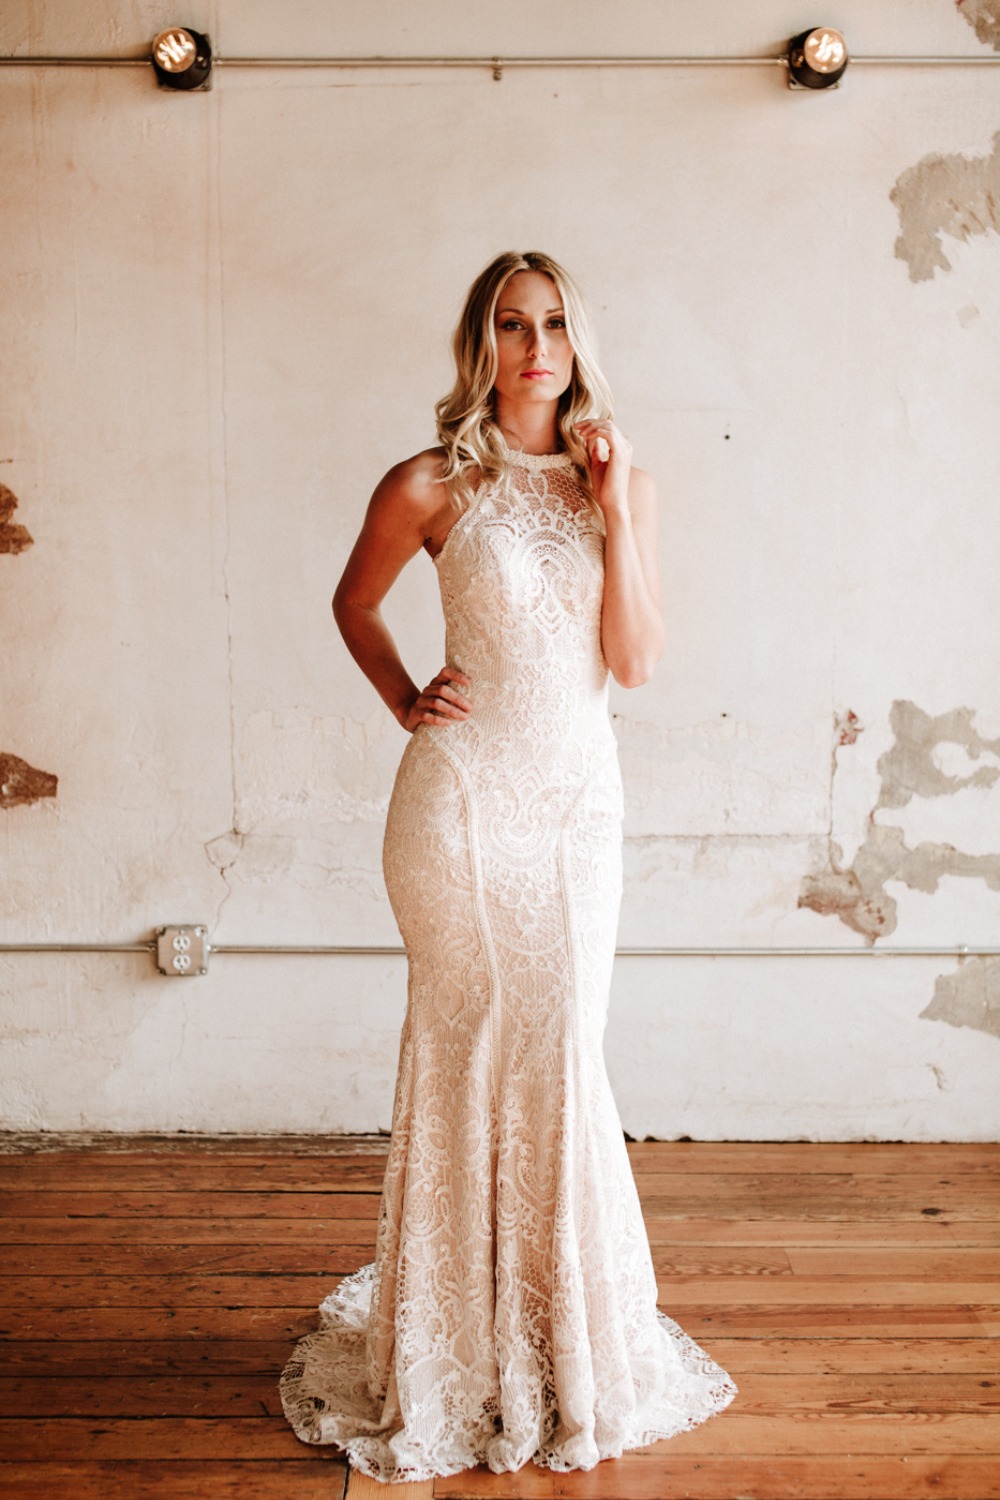 Custom made lace wedding dress from Angela Kim Couture